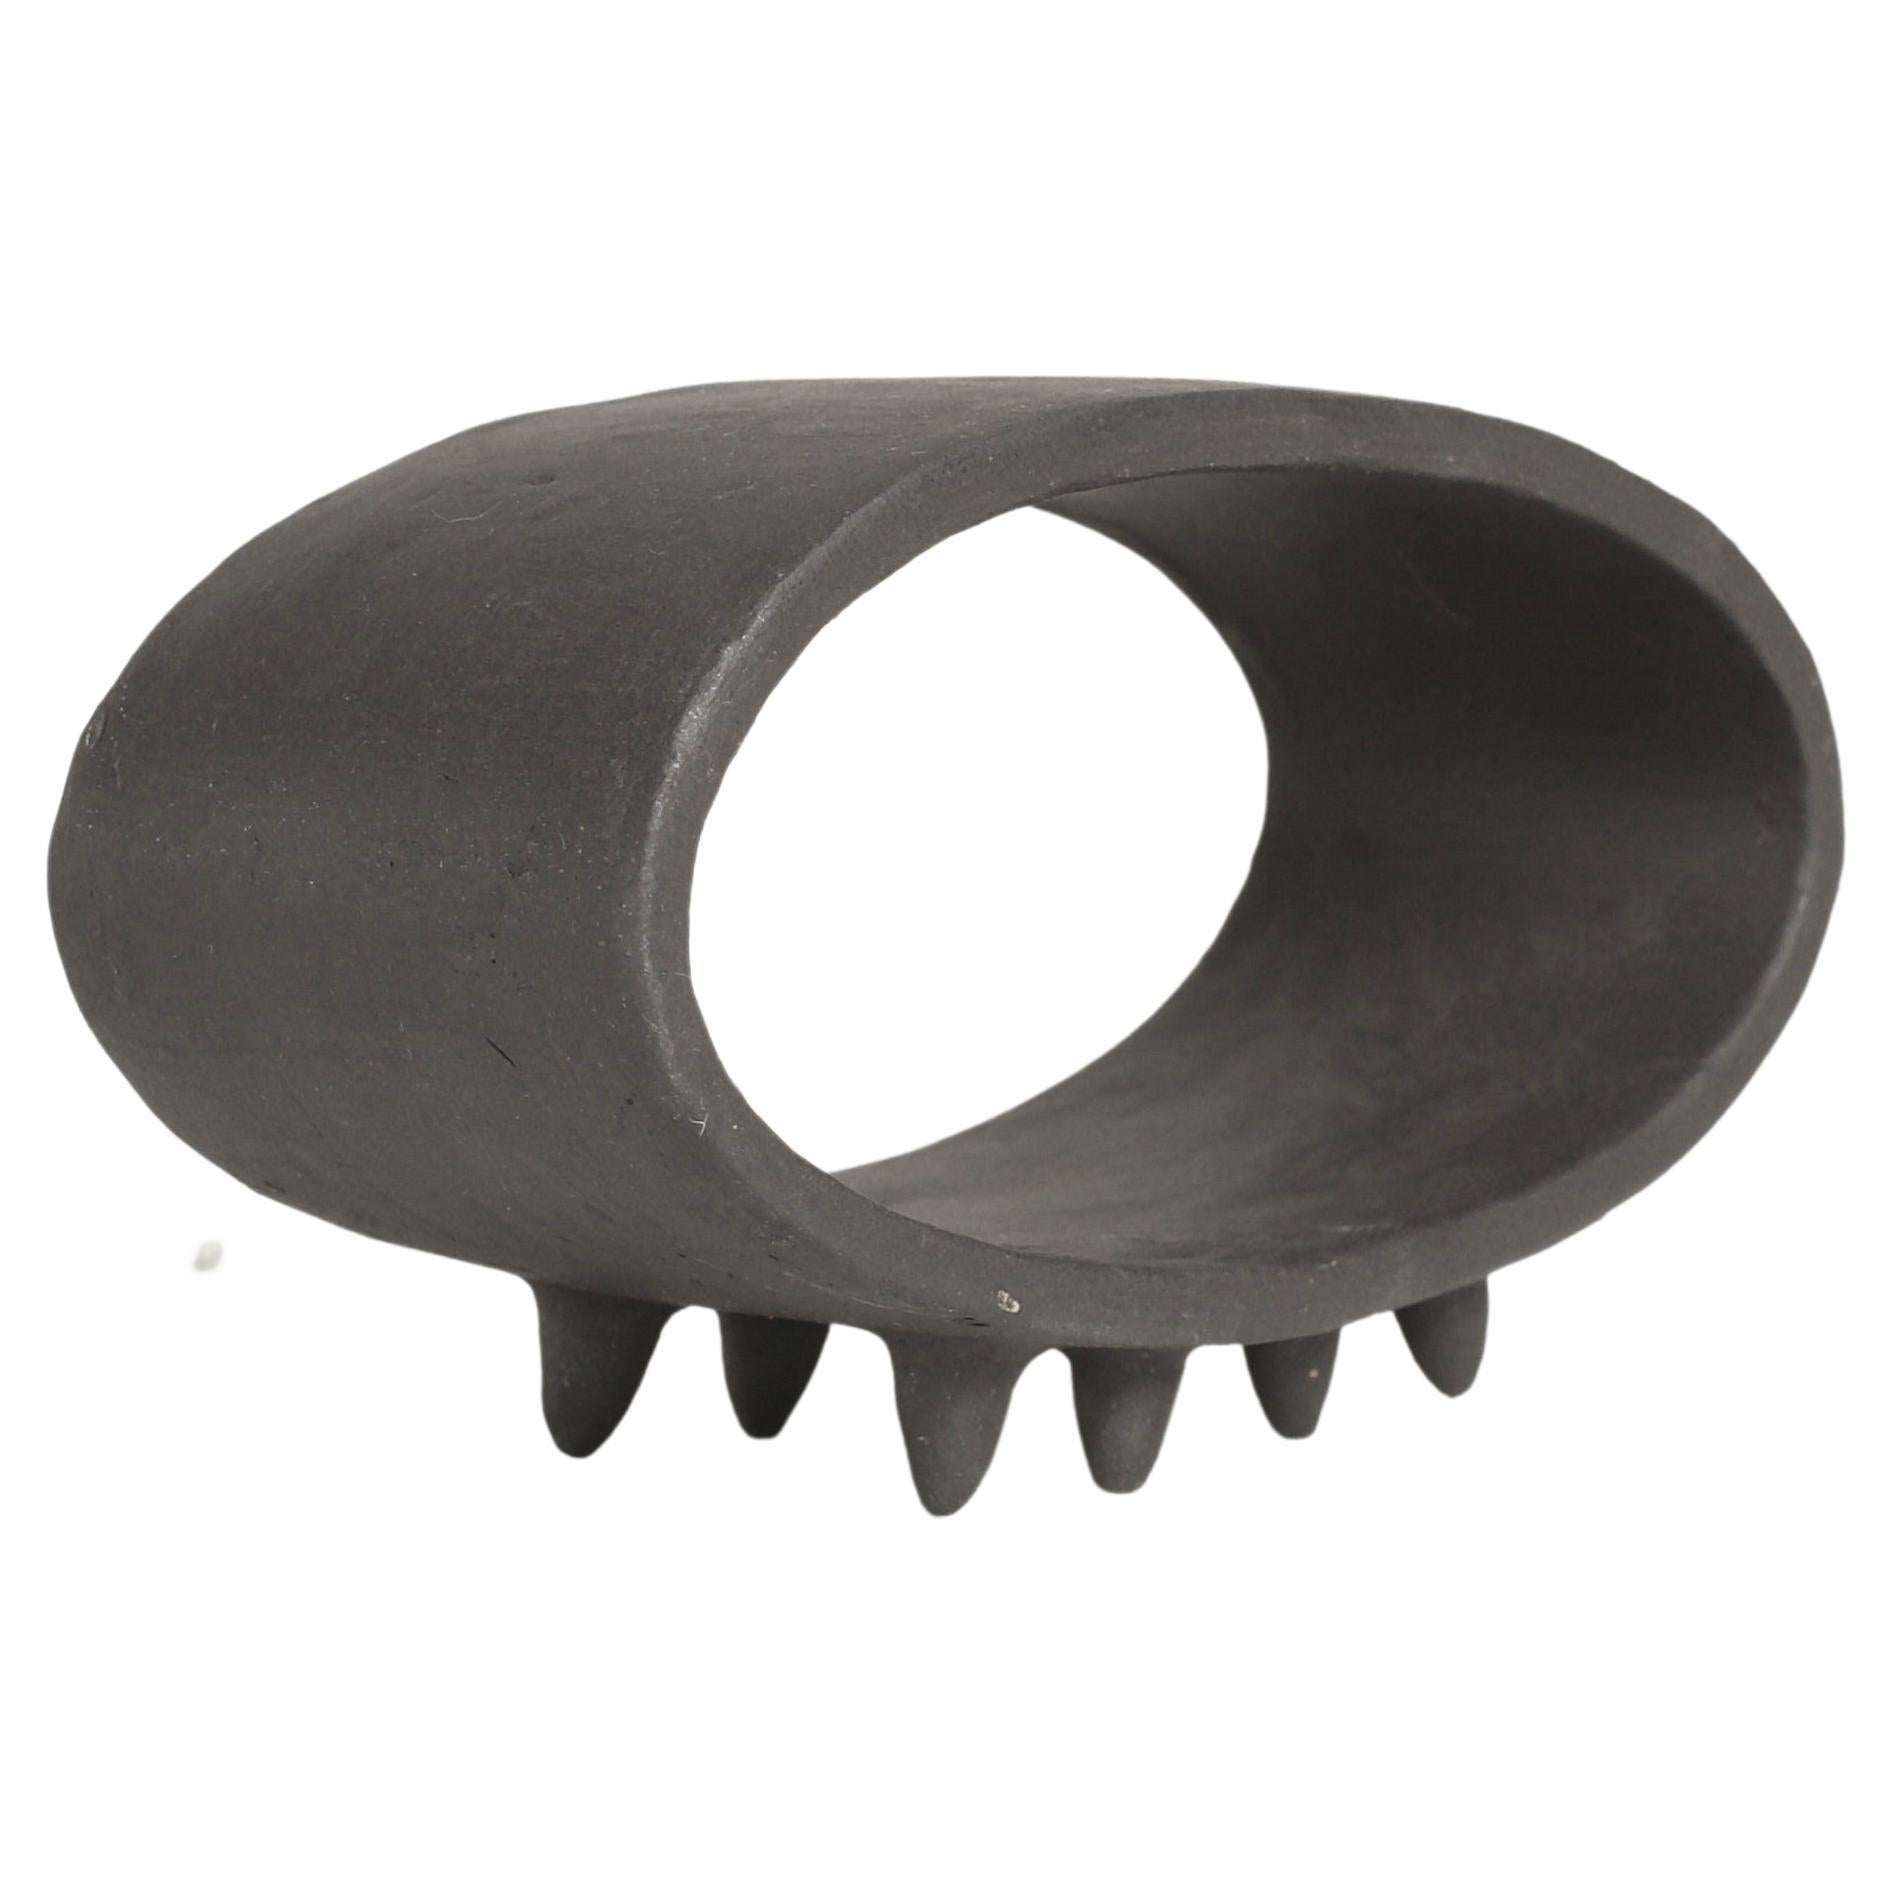 Black Oval Ceramic Sculpture with 2 Rows of Small Pointed Feet For Sale